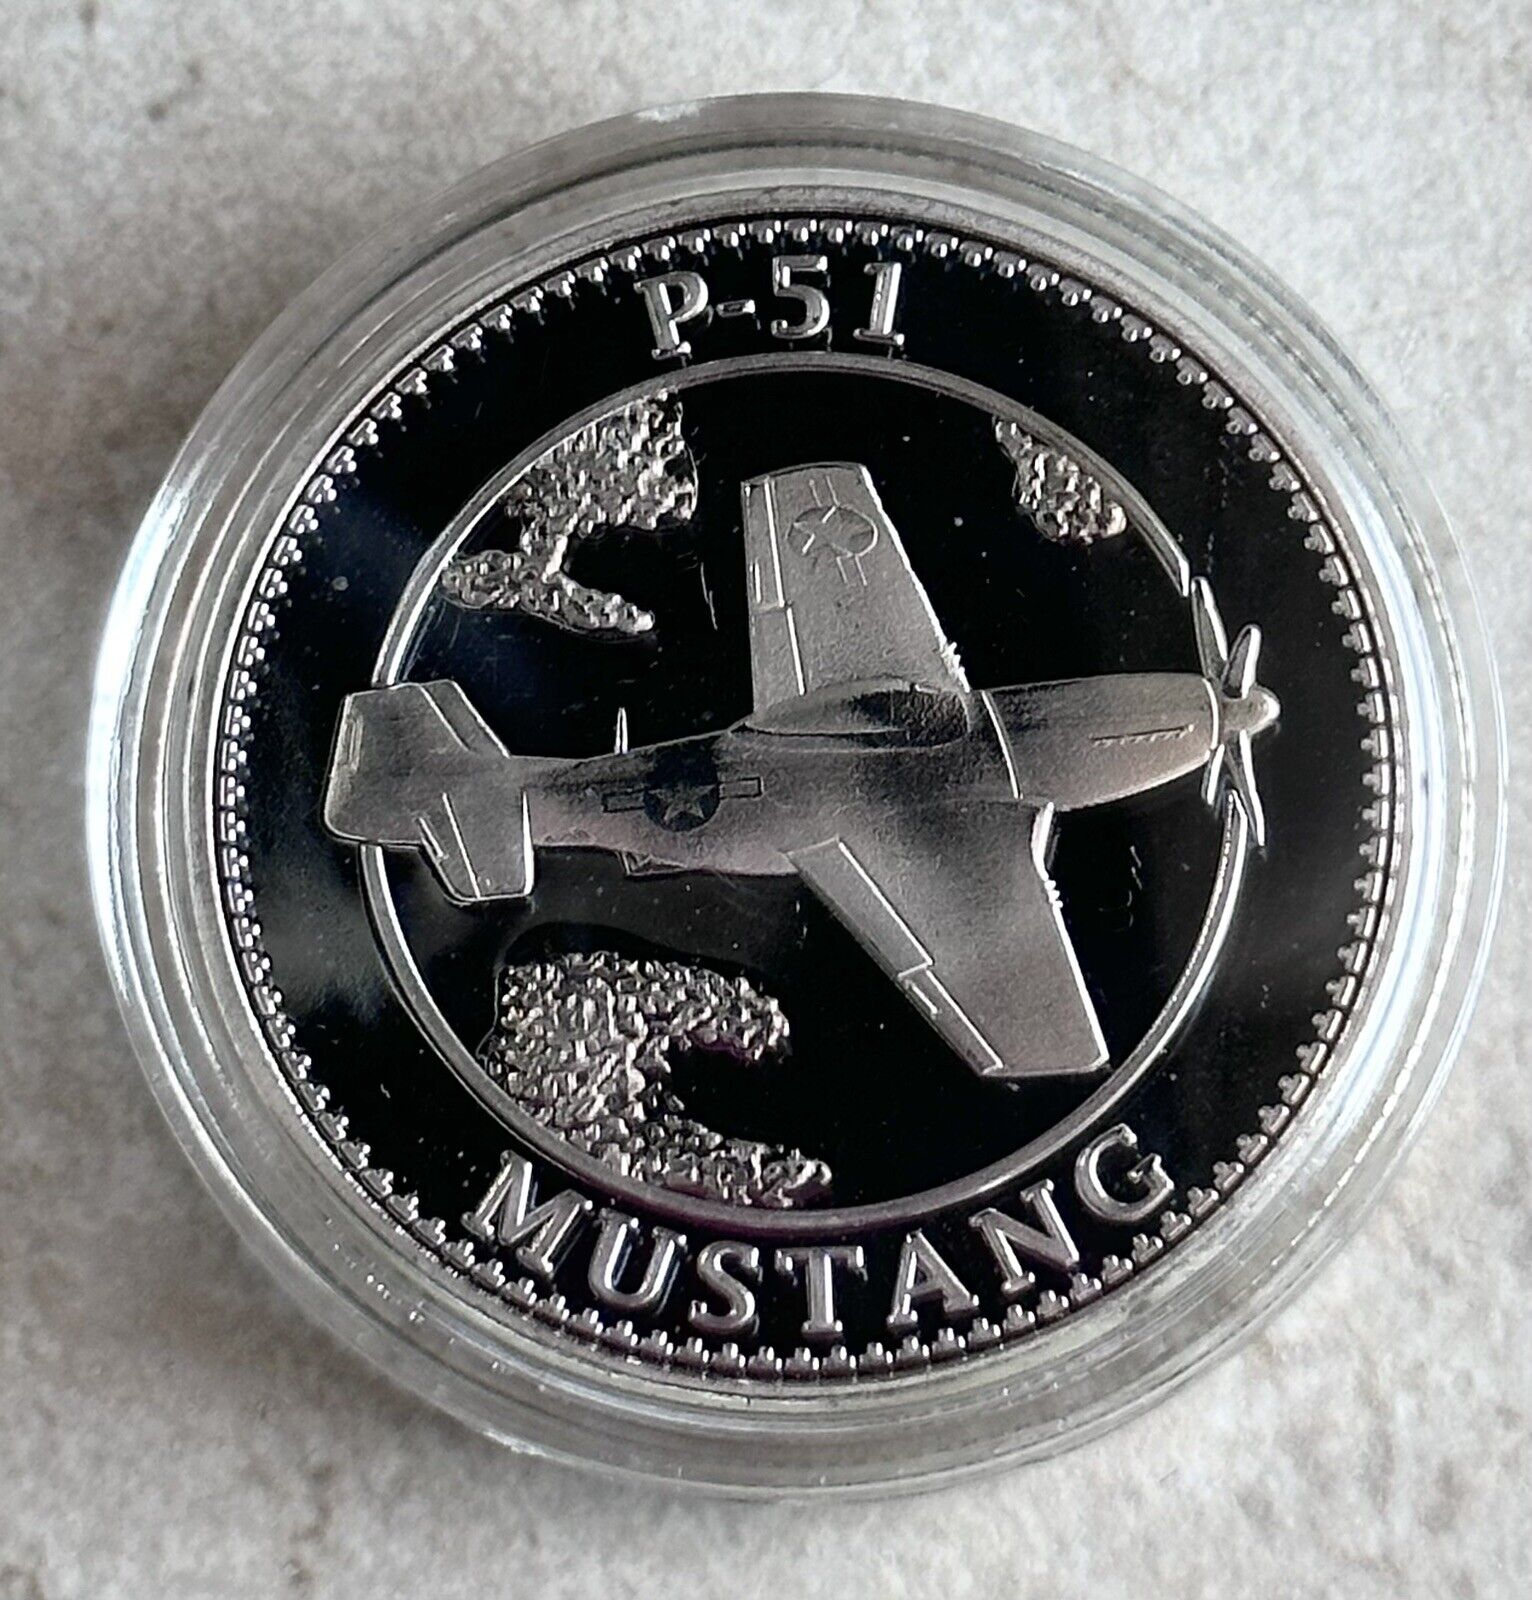 U S ARMY AIR FORCES P-51 MUSTANG Challenge Coin